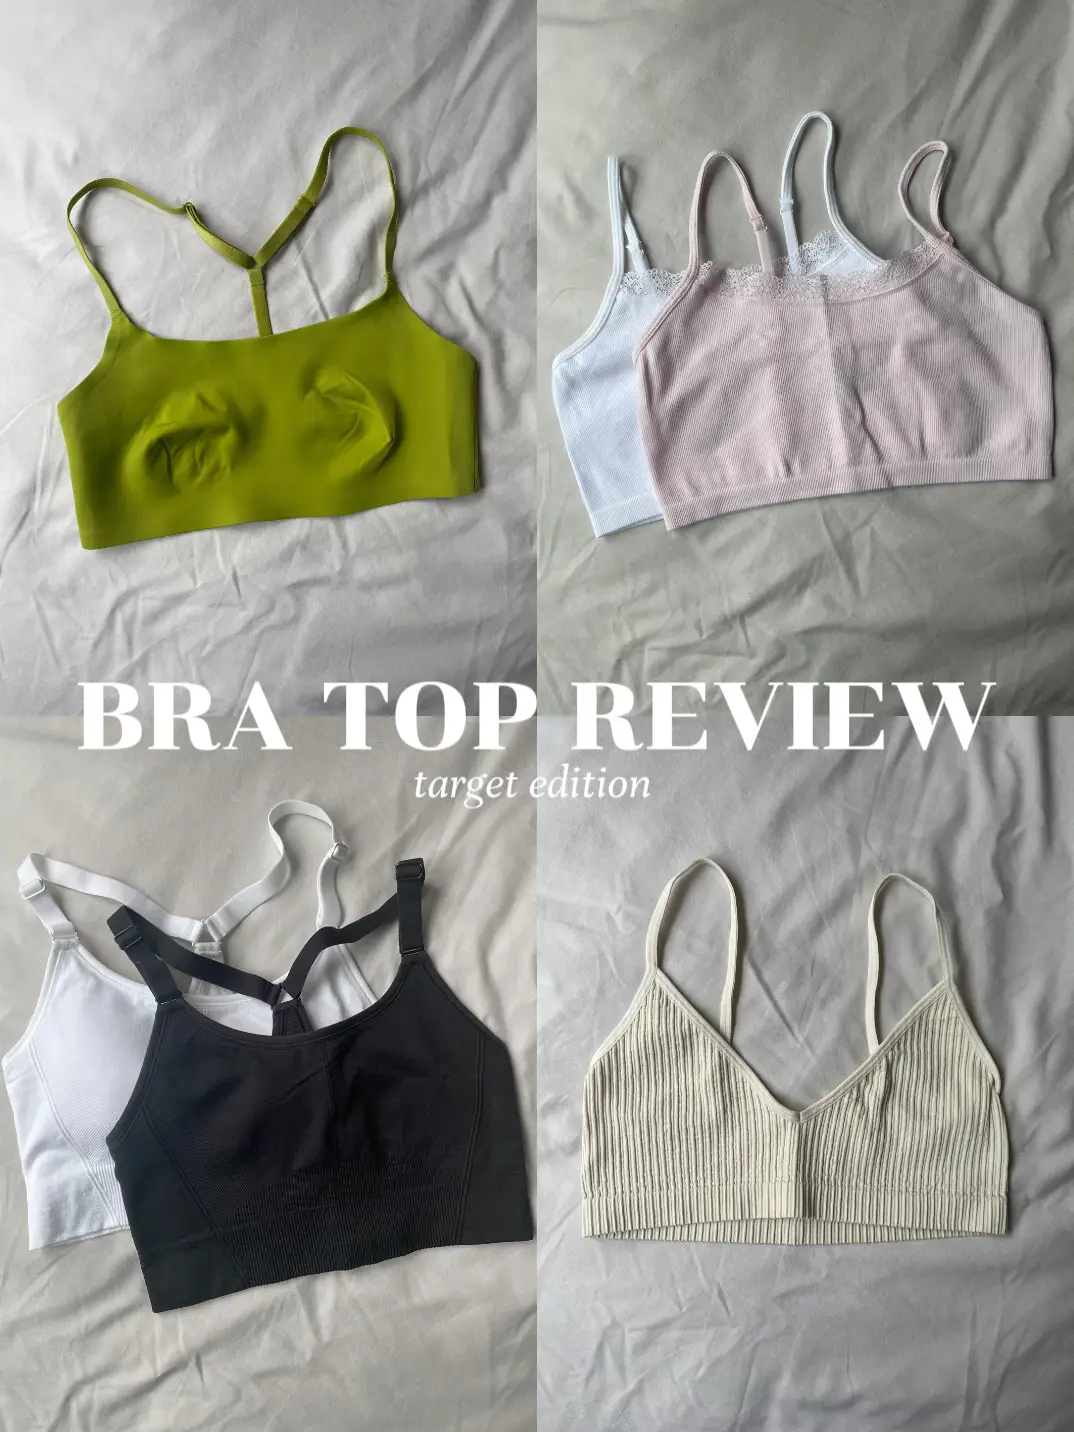 Bra Tops from Target Review, Gallery posted by kimberlyfleming